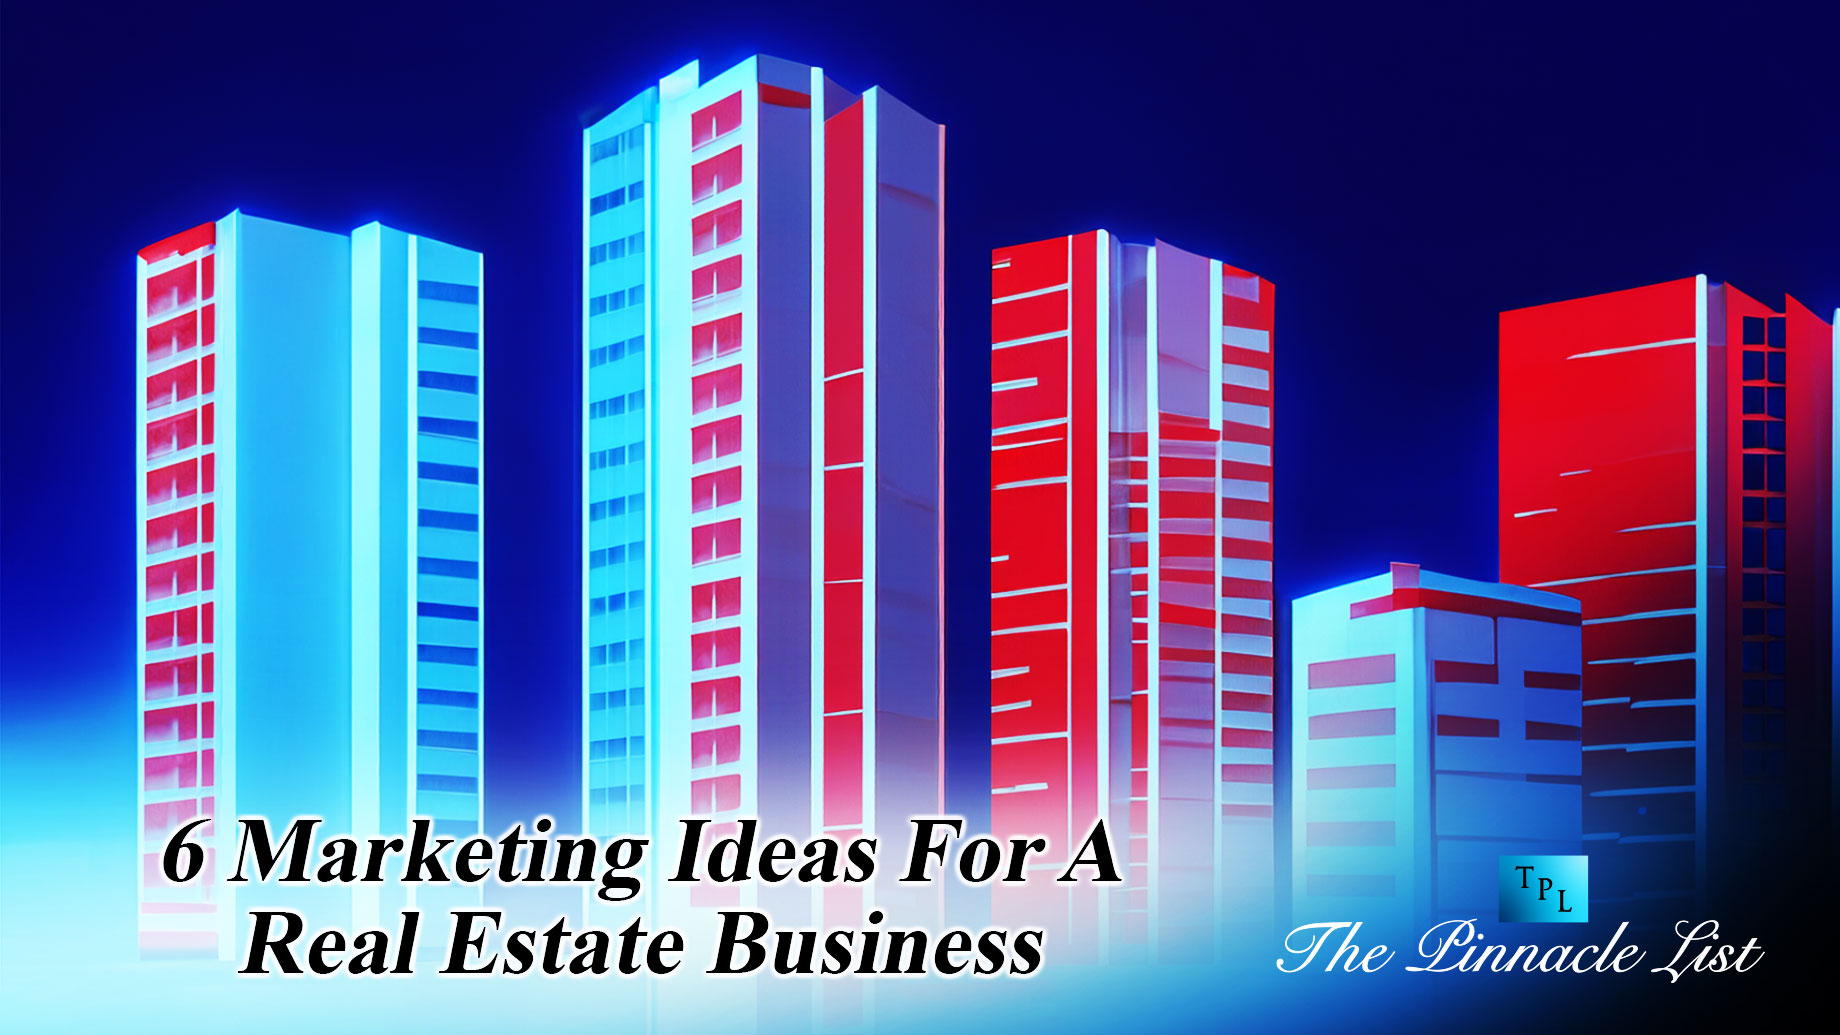 6 Marketing Ideas For A Real Estate Business